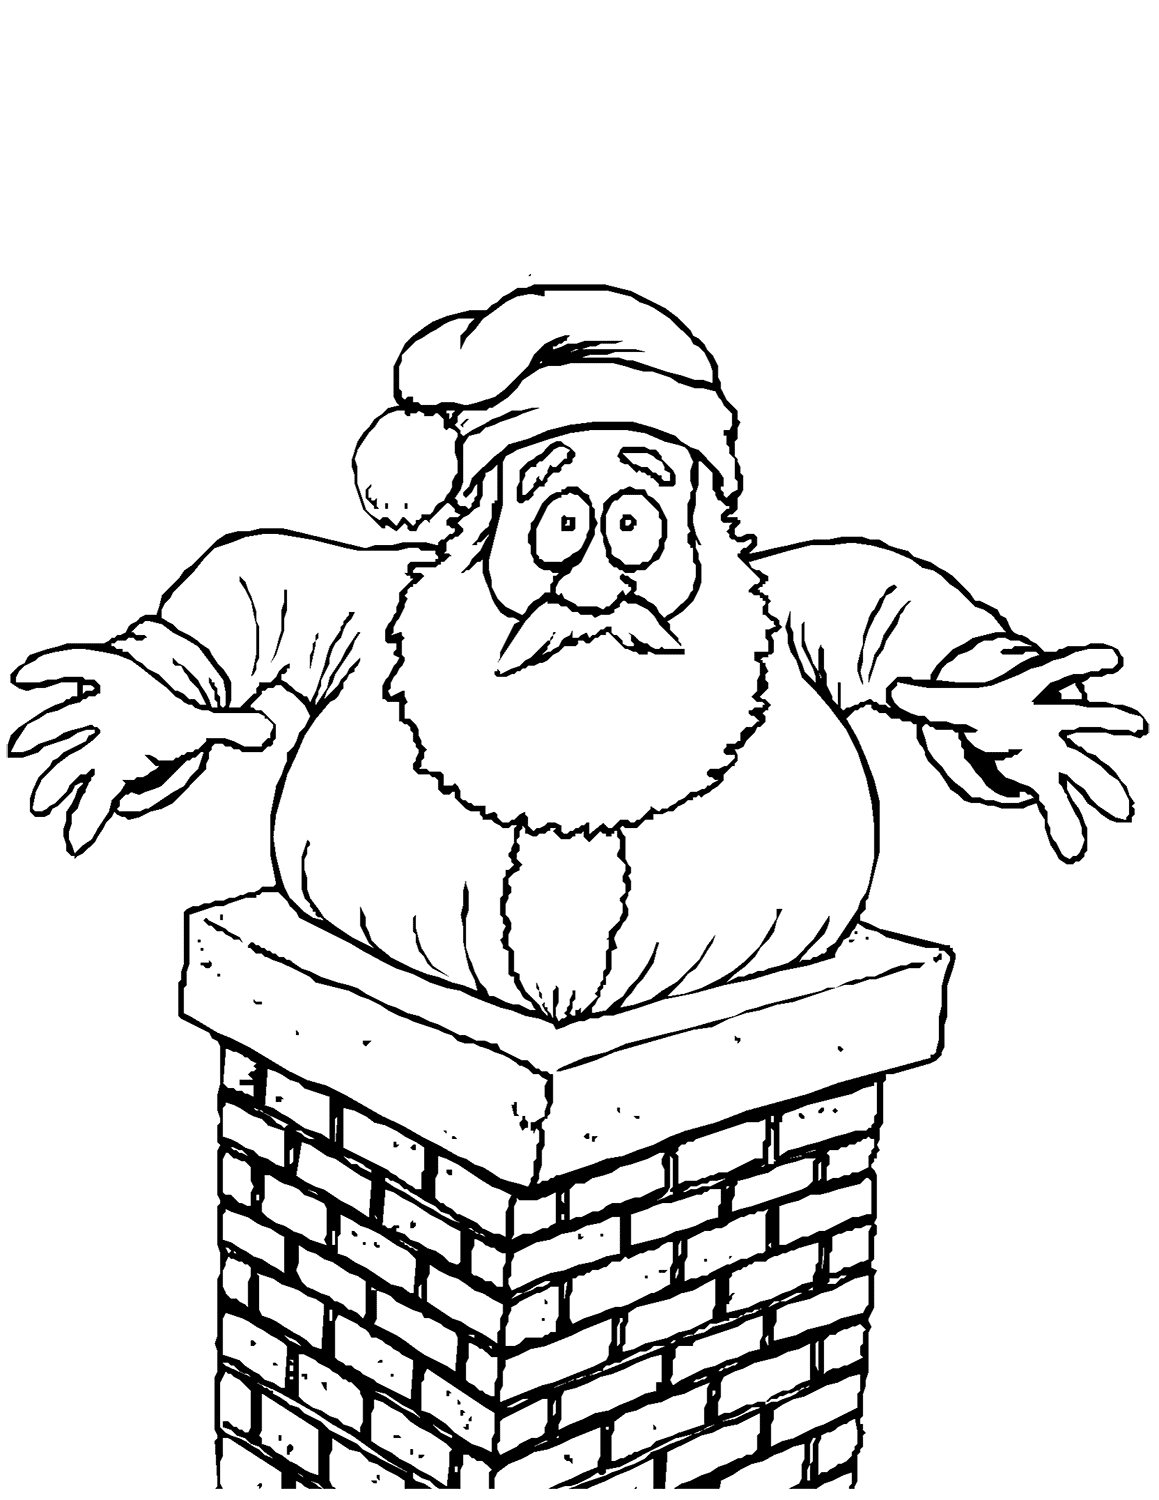 Santa Stuck In The Chimney Christmas Coloring Page